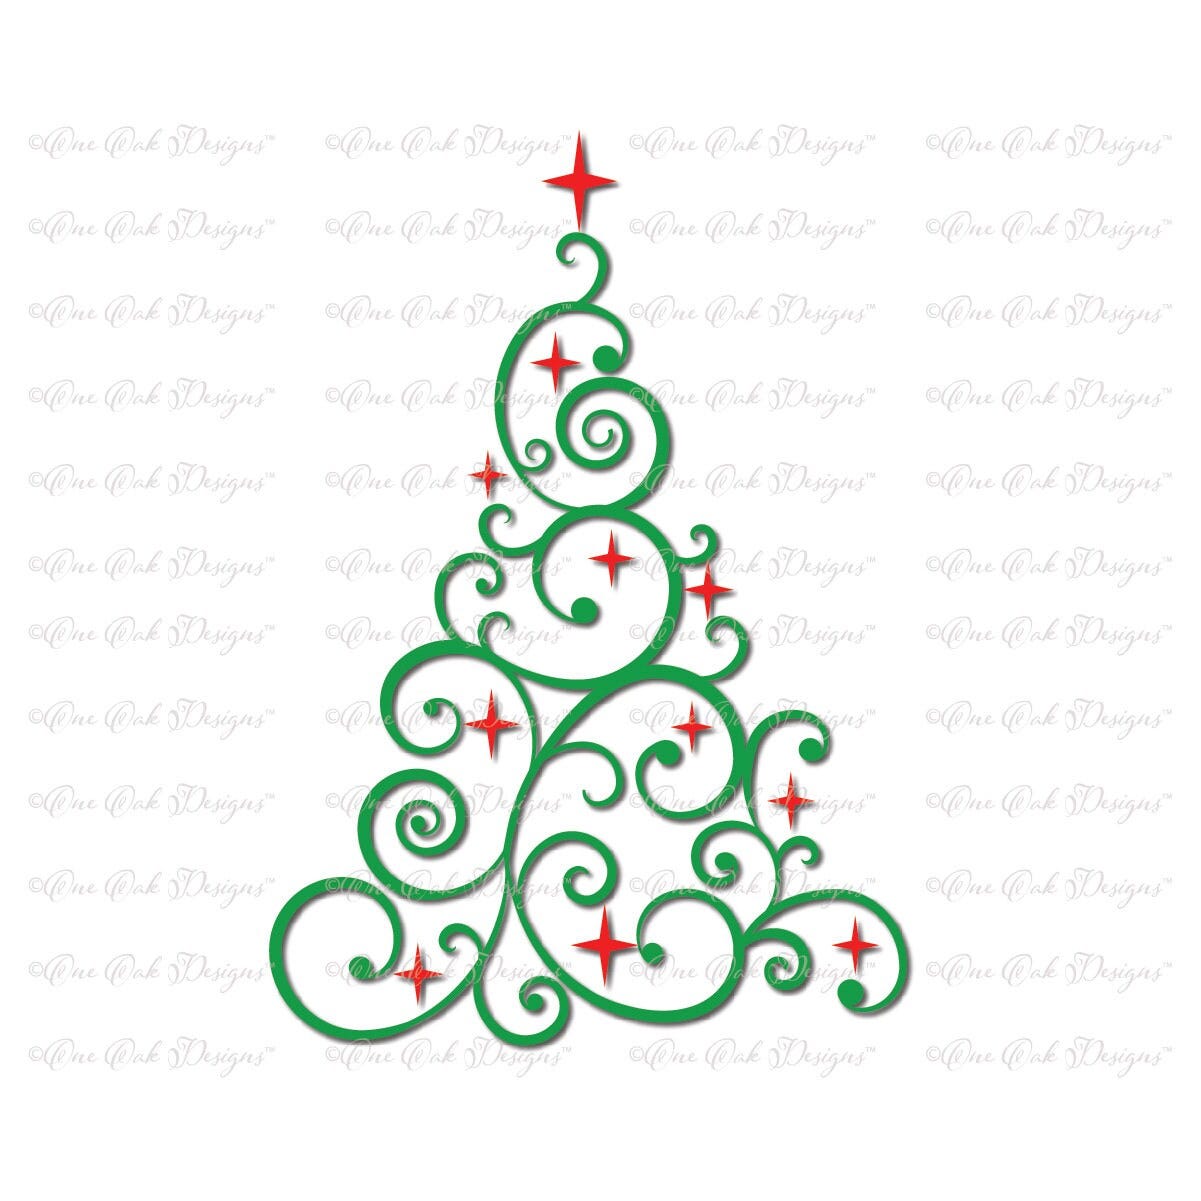 Swirly Tree with Stars SVG File PDF / dxf / jpg / png / Christmas Tree SVG File for Cameo svg file for Cricut & other electronic cutters